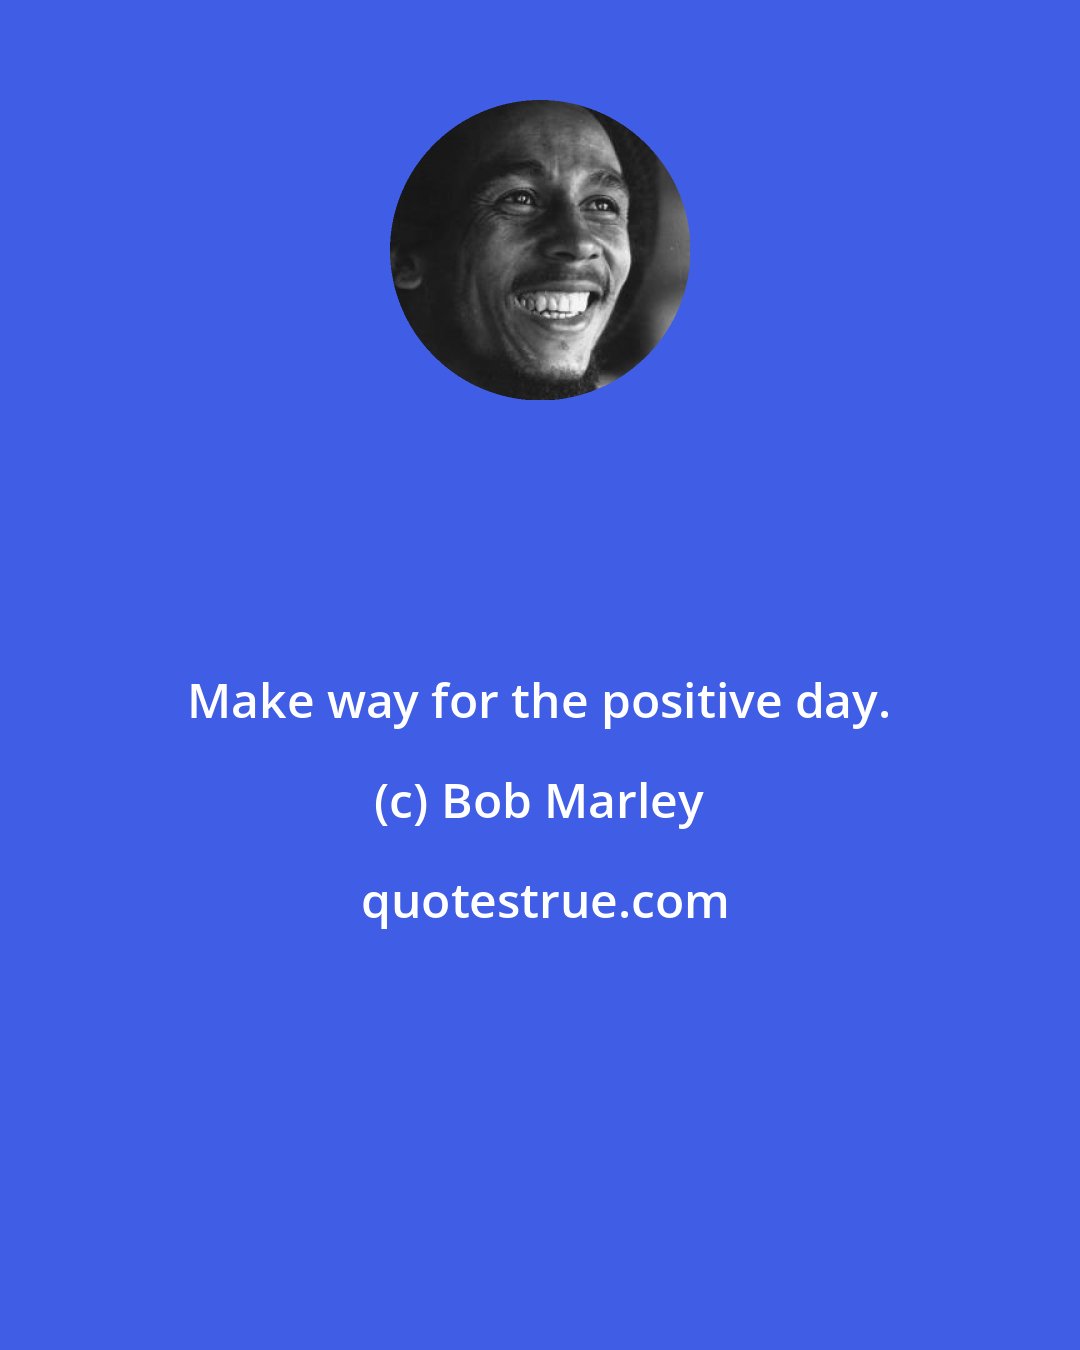 Bob Marley: Make way for the positive day.